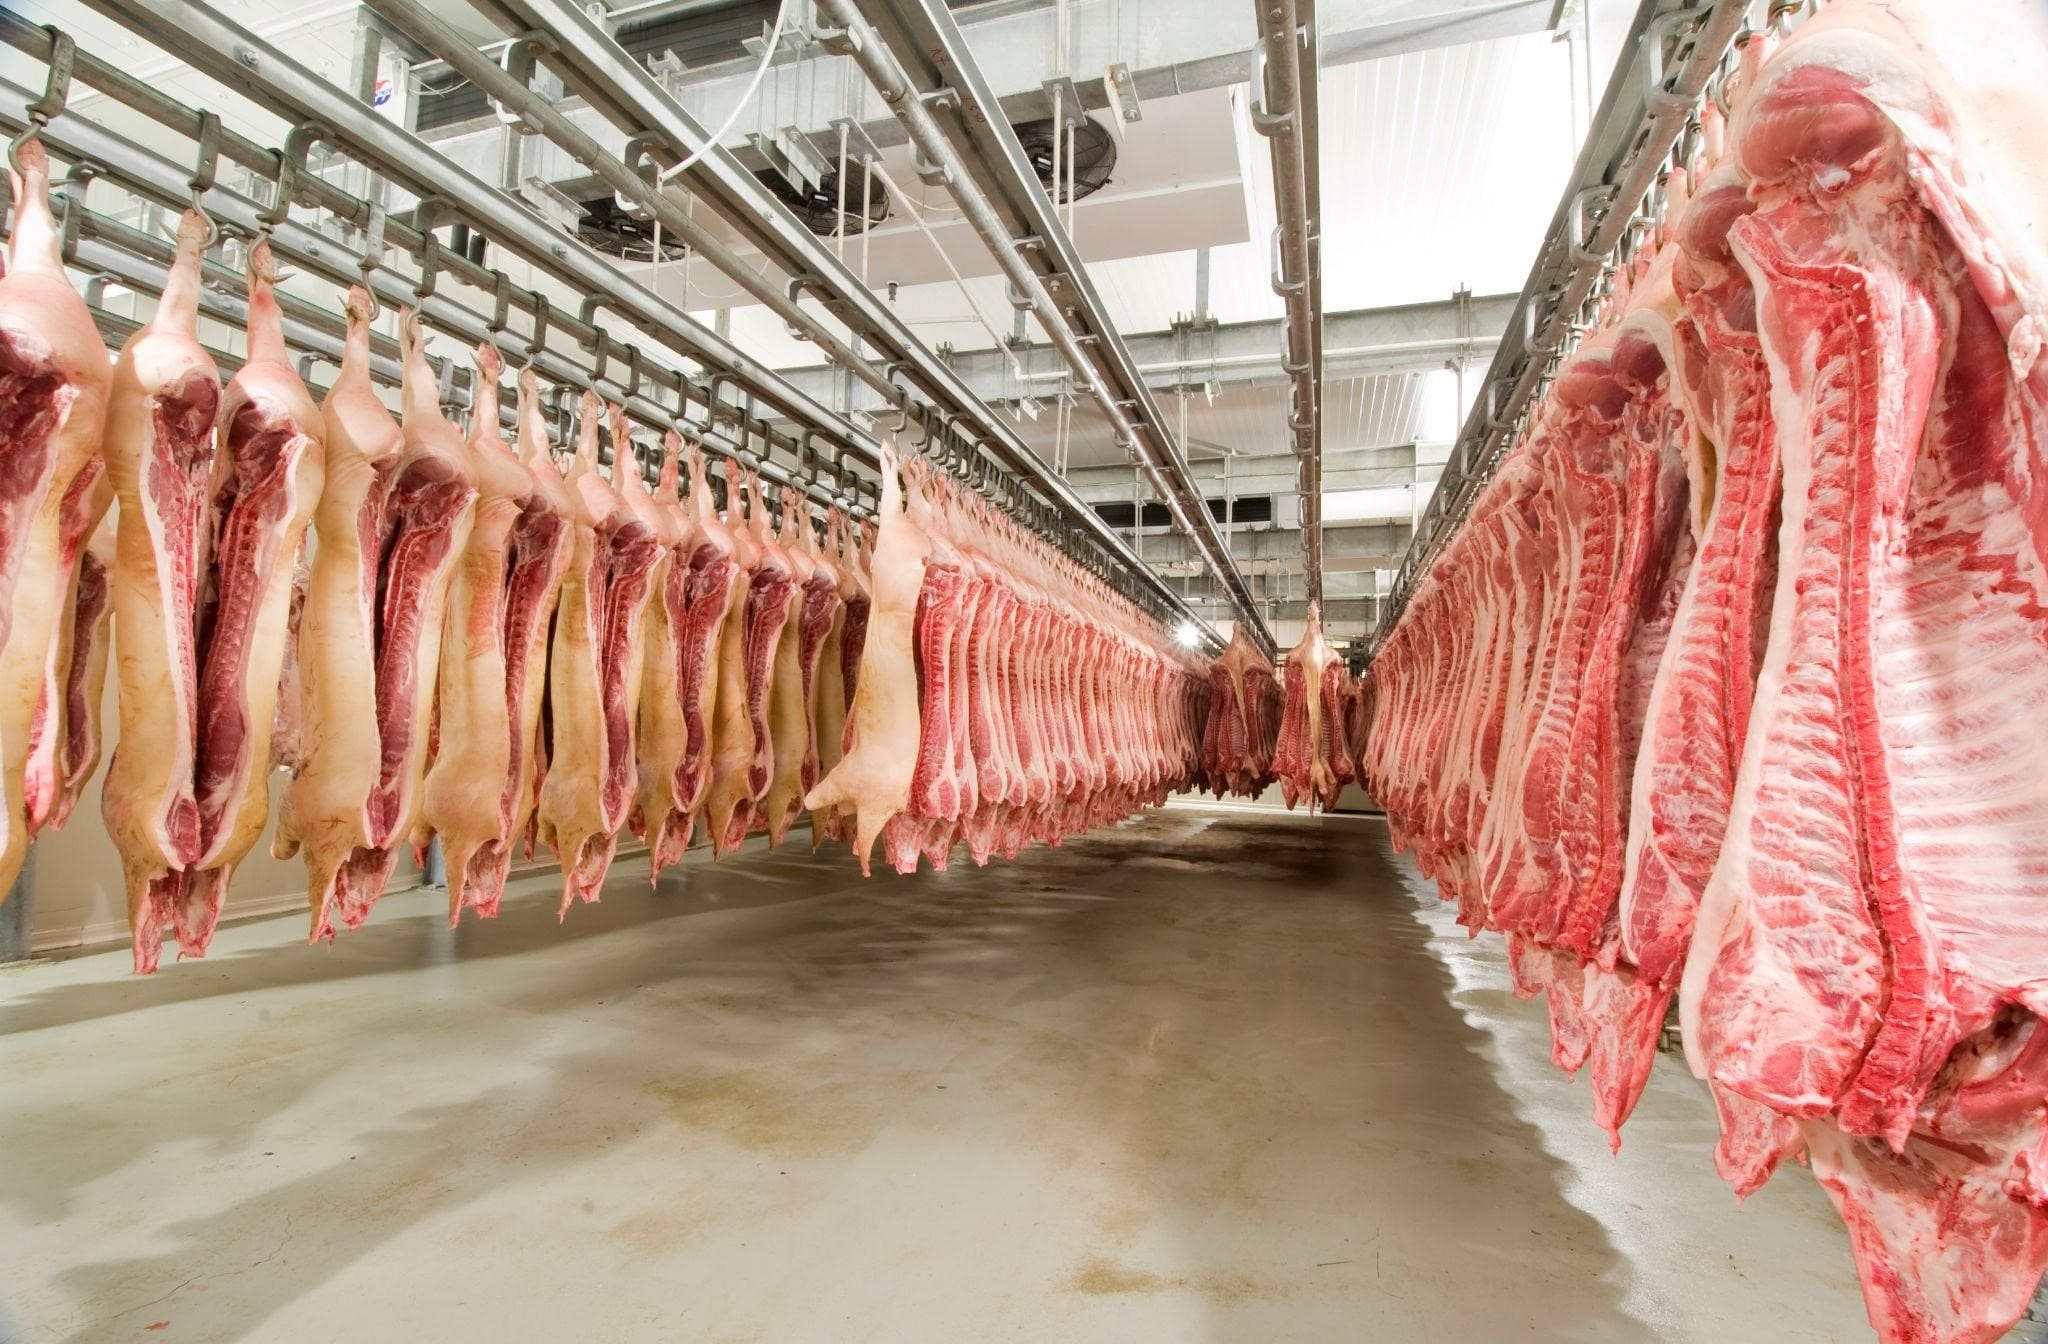 Abattoir Valuation: Which approach is right for your business?